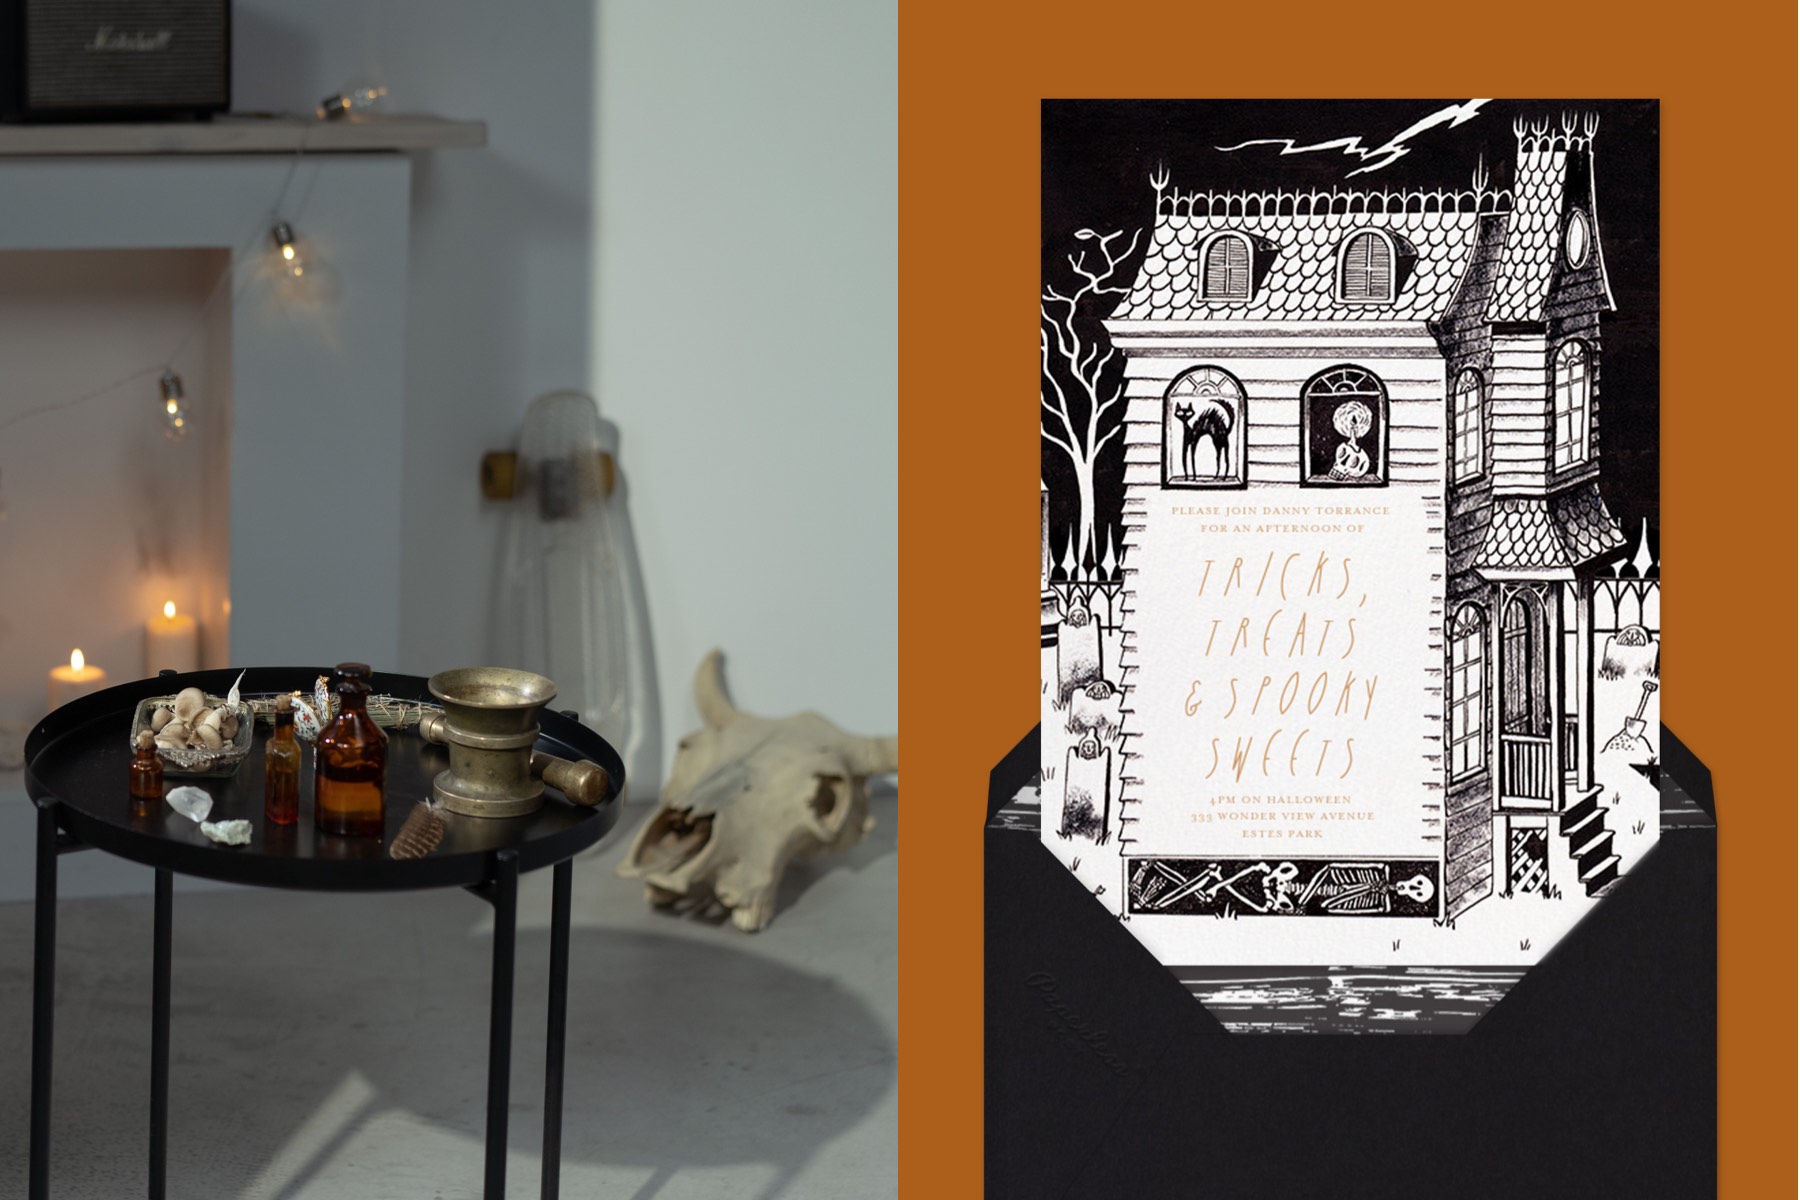 Left: A spooky scene featuring drinks on a table and a cow skull. Right: "The Old Haunts" invitation by Paperless Post.